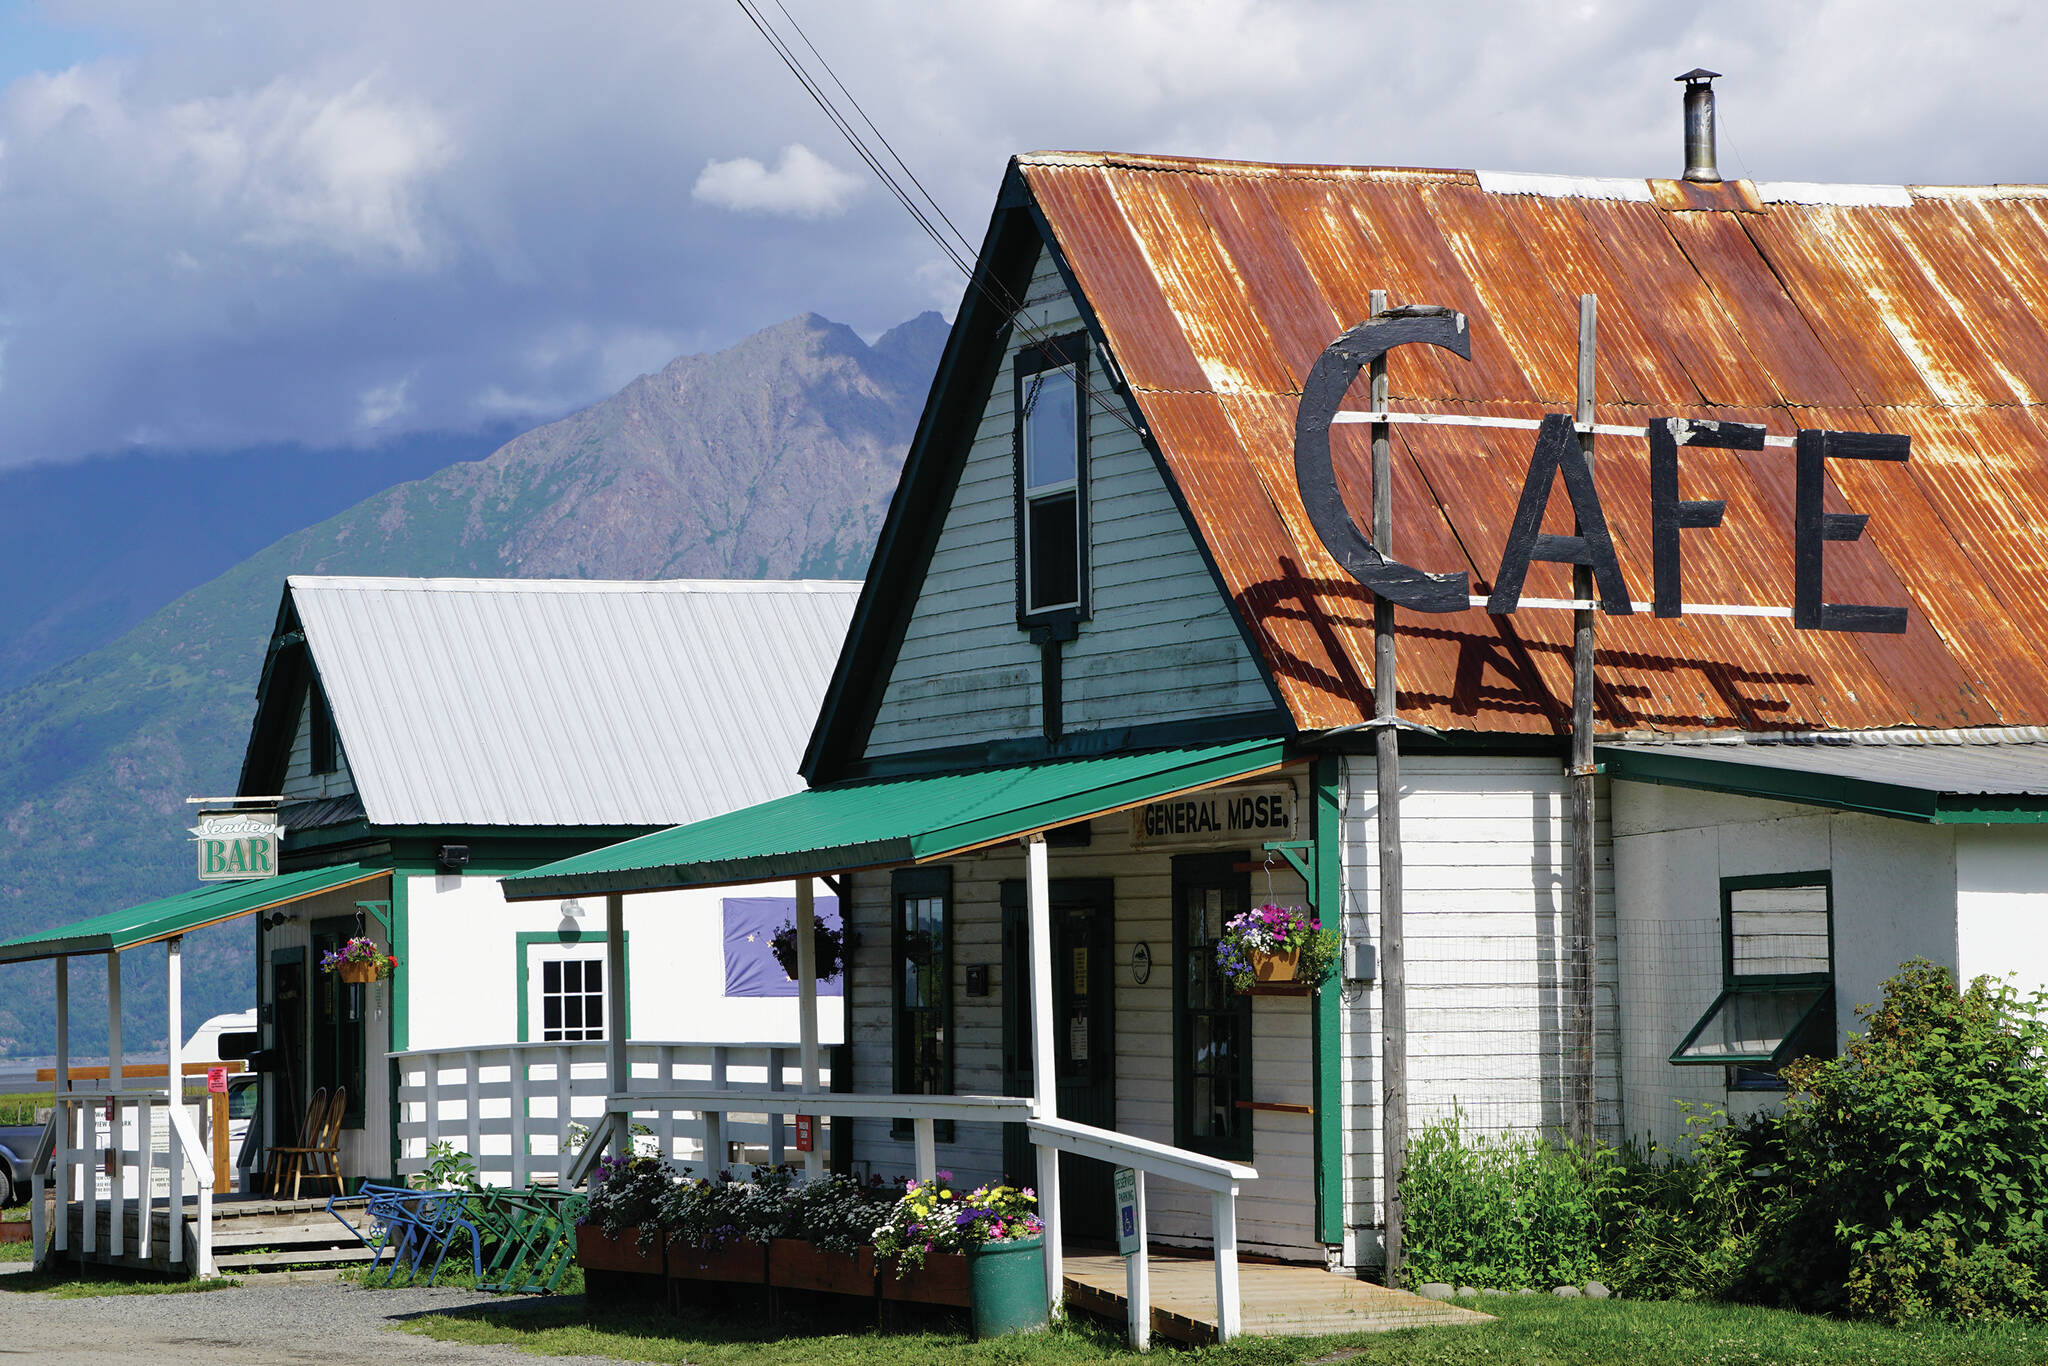 A cafe in Hope, Alaska, is a commonly photographed building in the historic mining town, as seen here on July 21, 2020. (Photo by Michael Armstrong/Homer News)